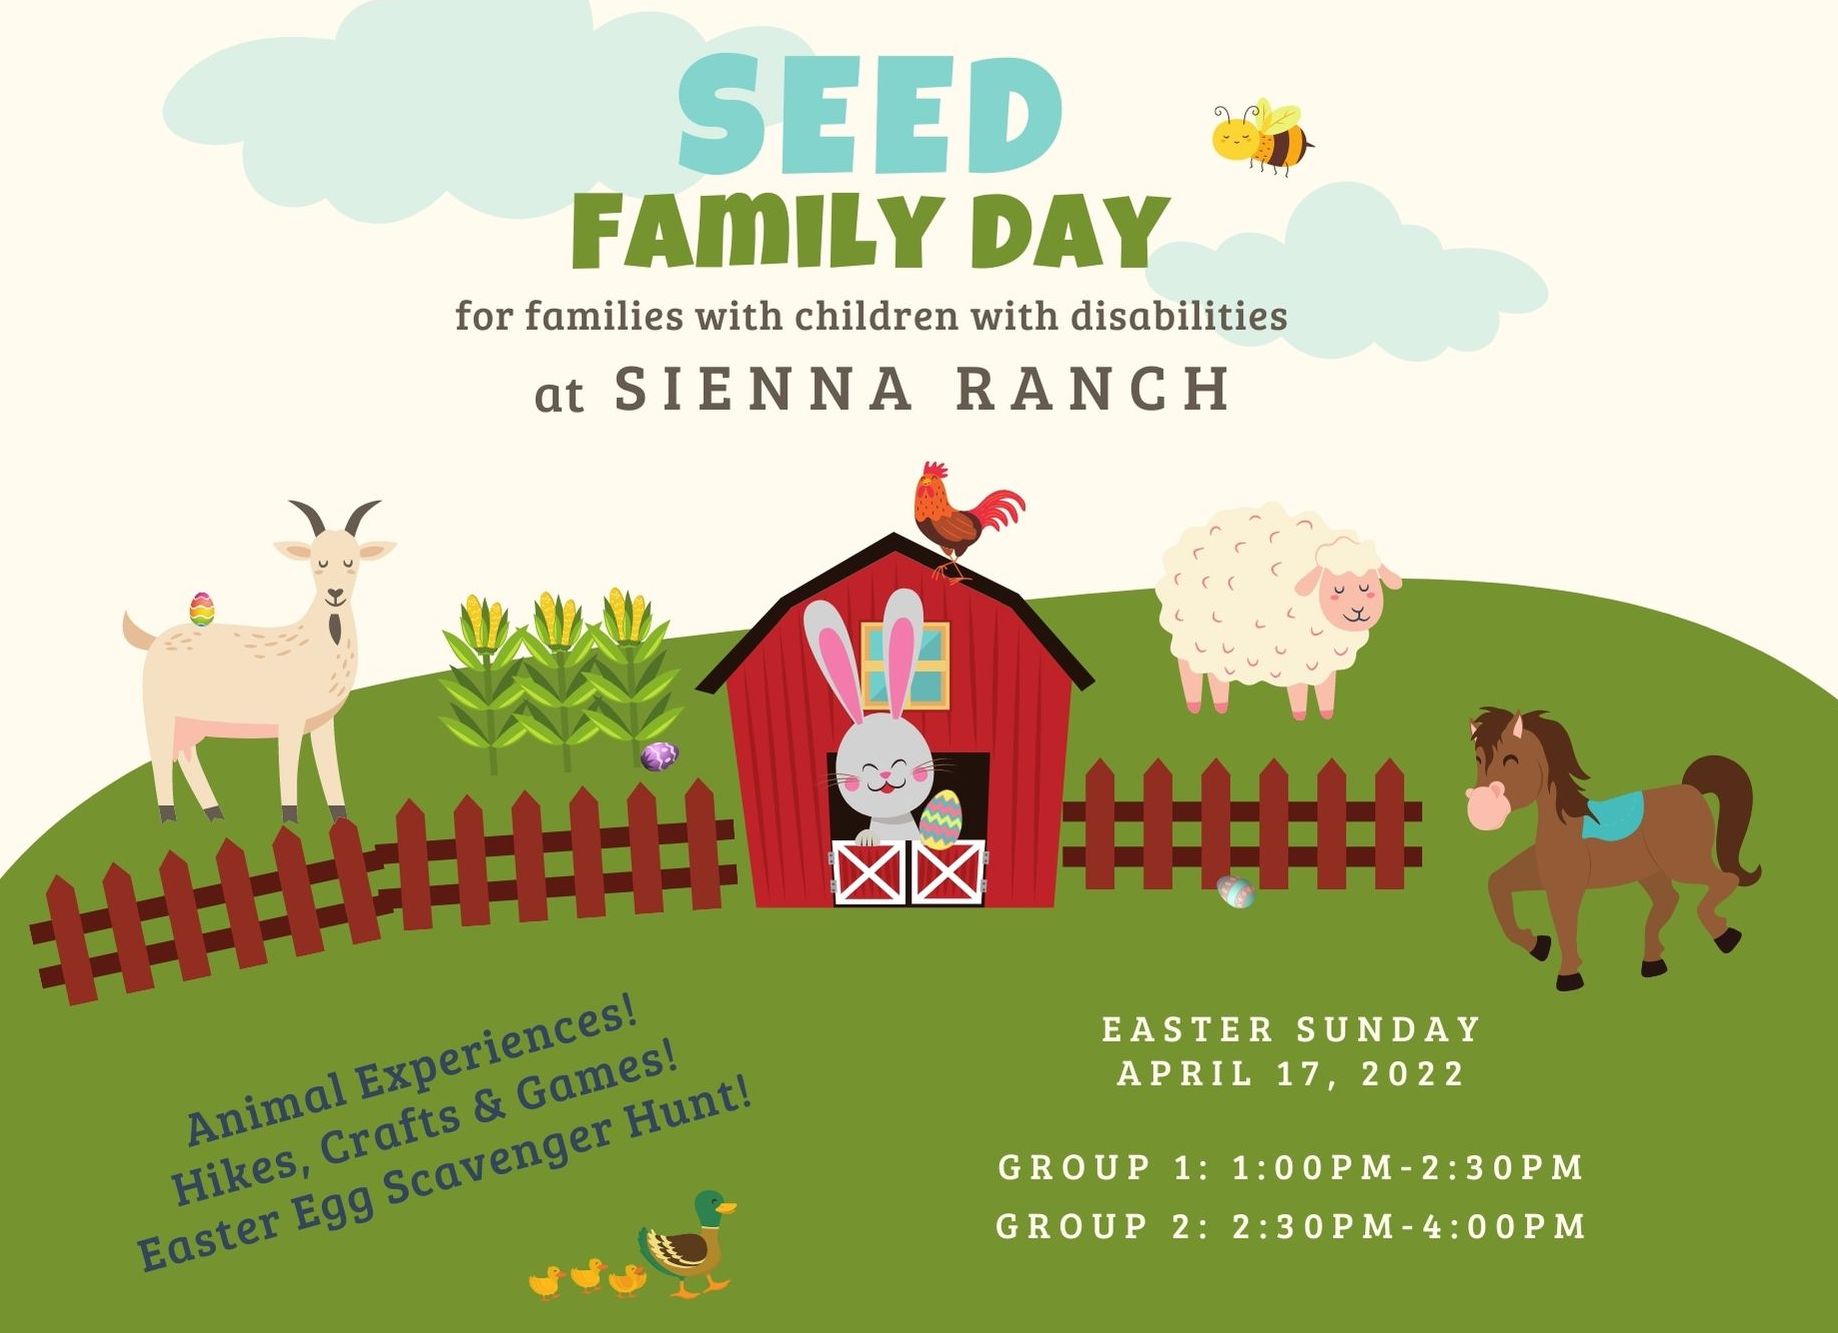 SEED Family Day at Sienna Ranch, April 17, 2022